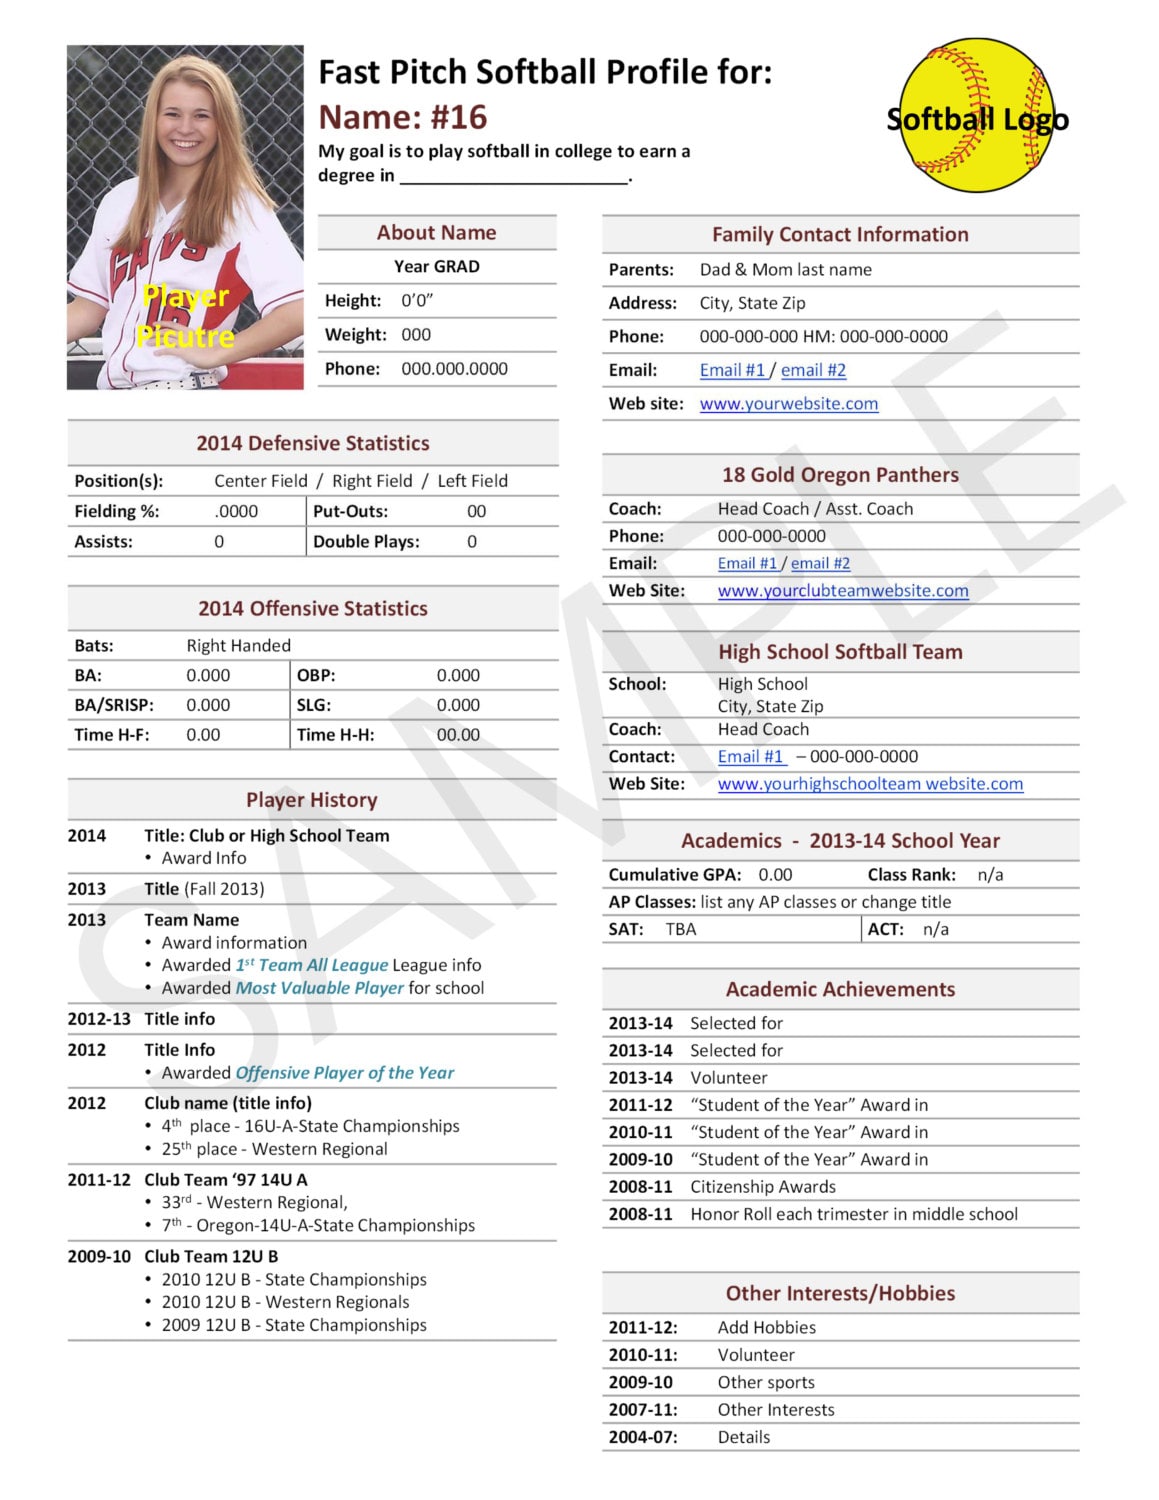 Fast Pitch Softball Player Profile Template Used for College